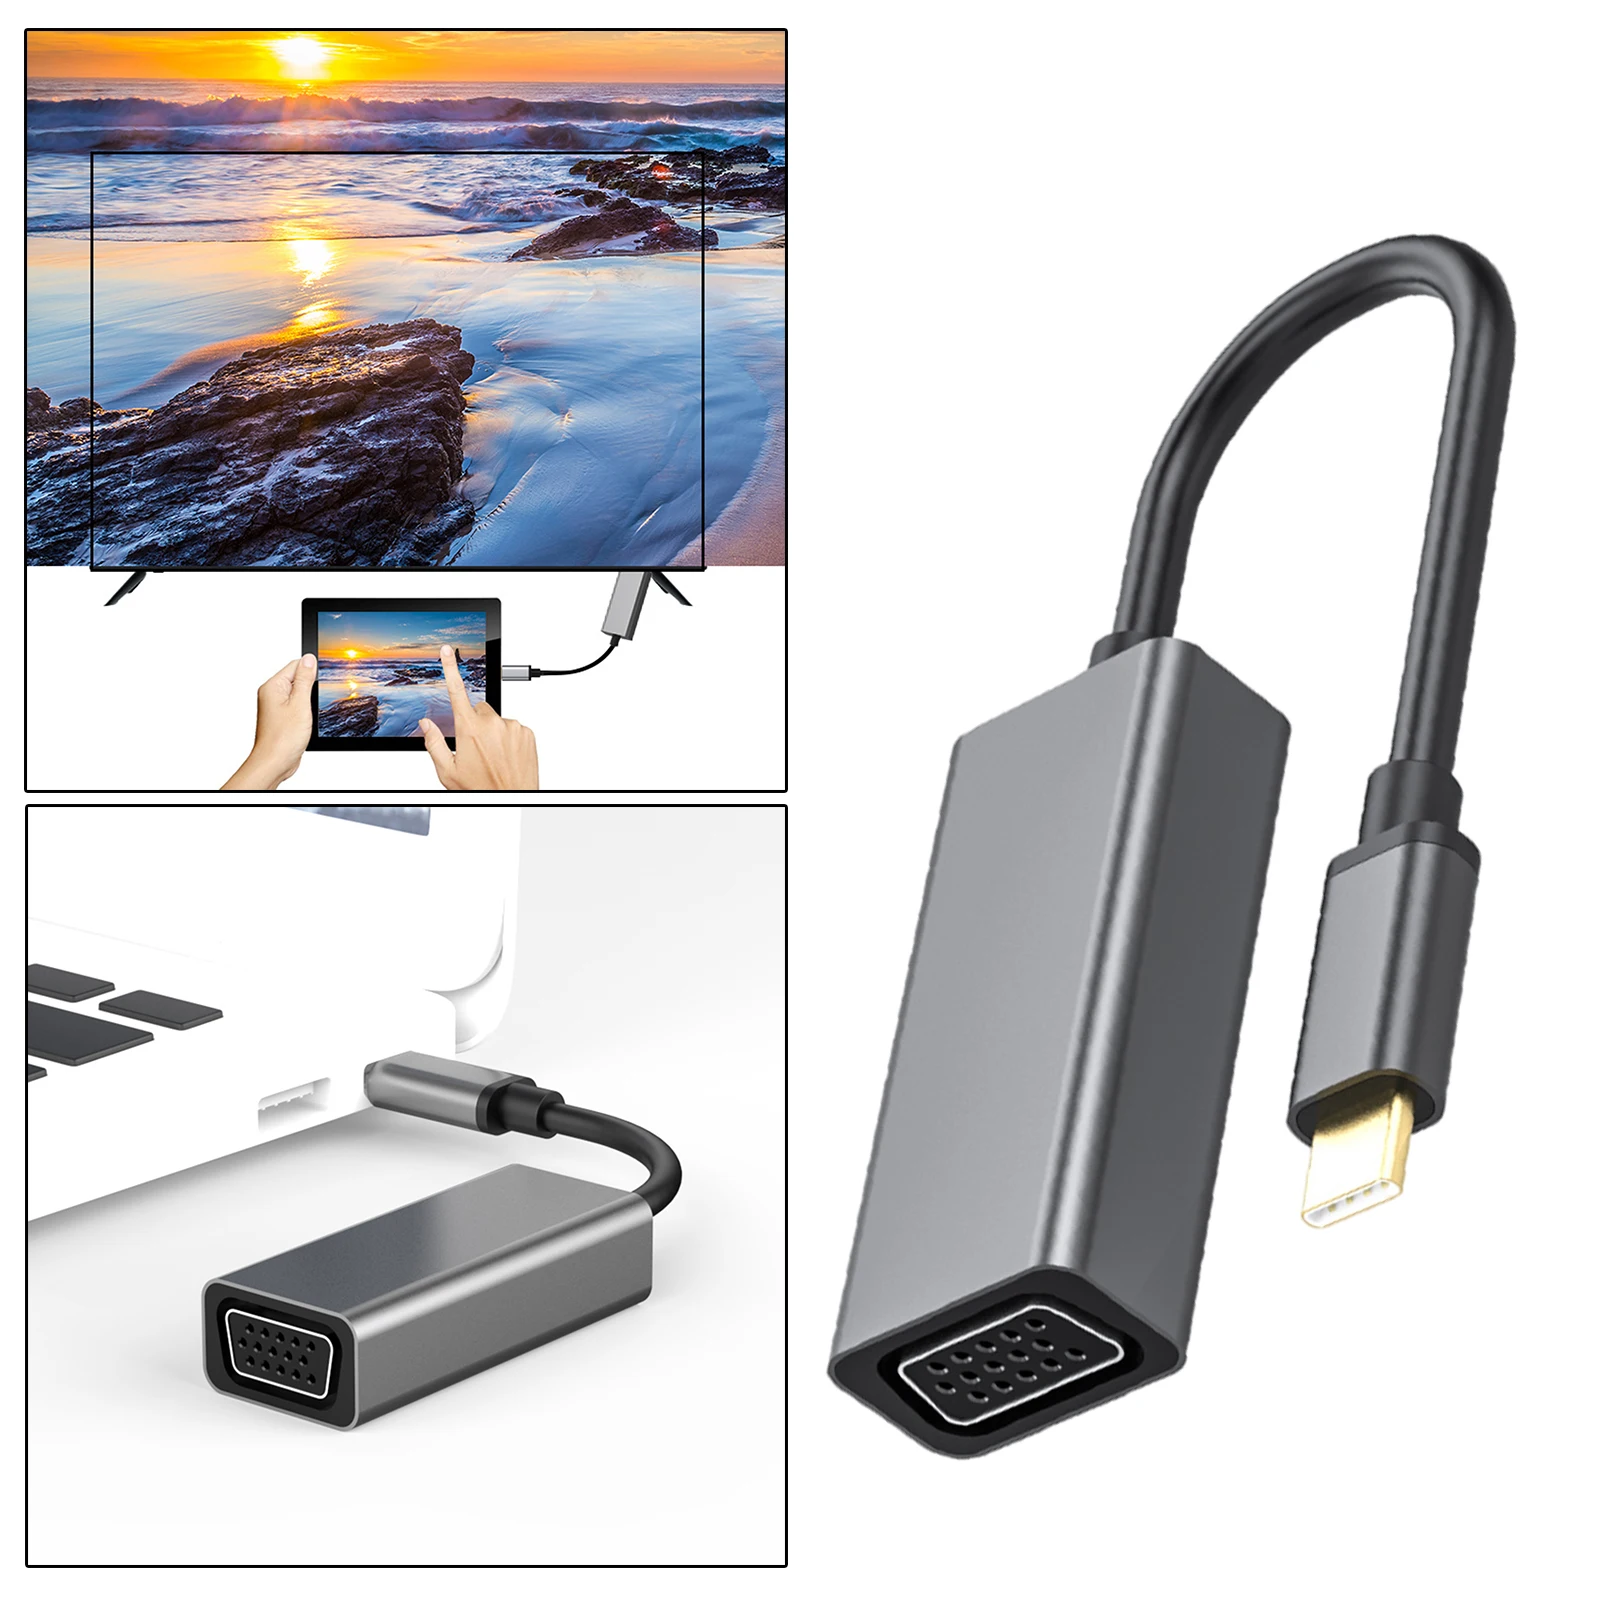 USB 3.1 to VGA Adapter Type C to VGA Converter 1920x1080 for MacBook TV Box for Microsoft Surface Projector Smartphones